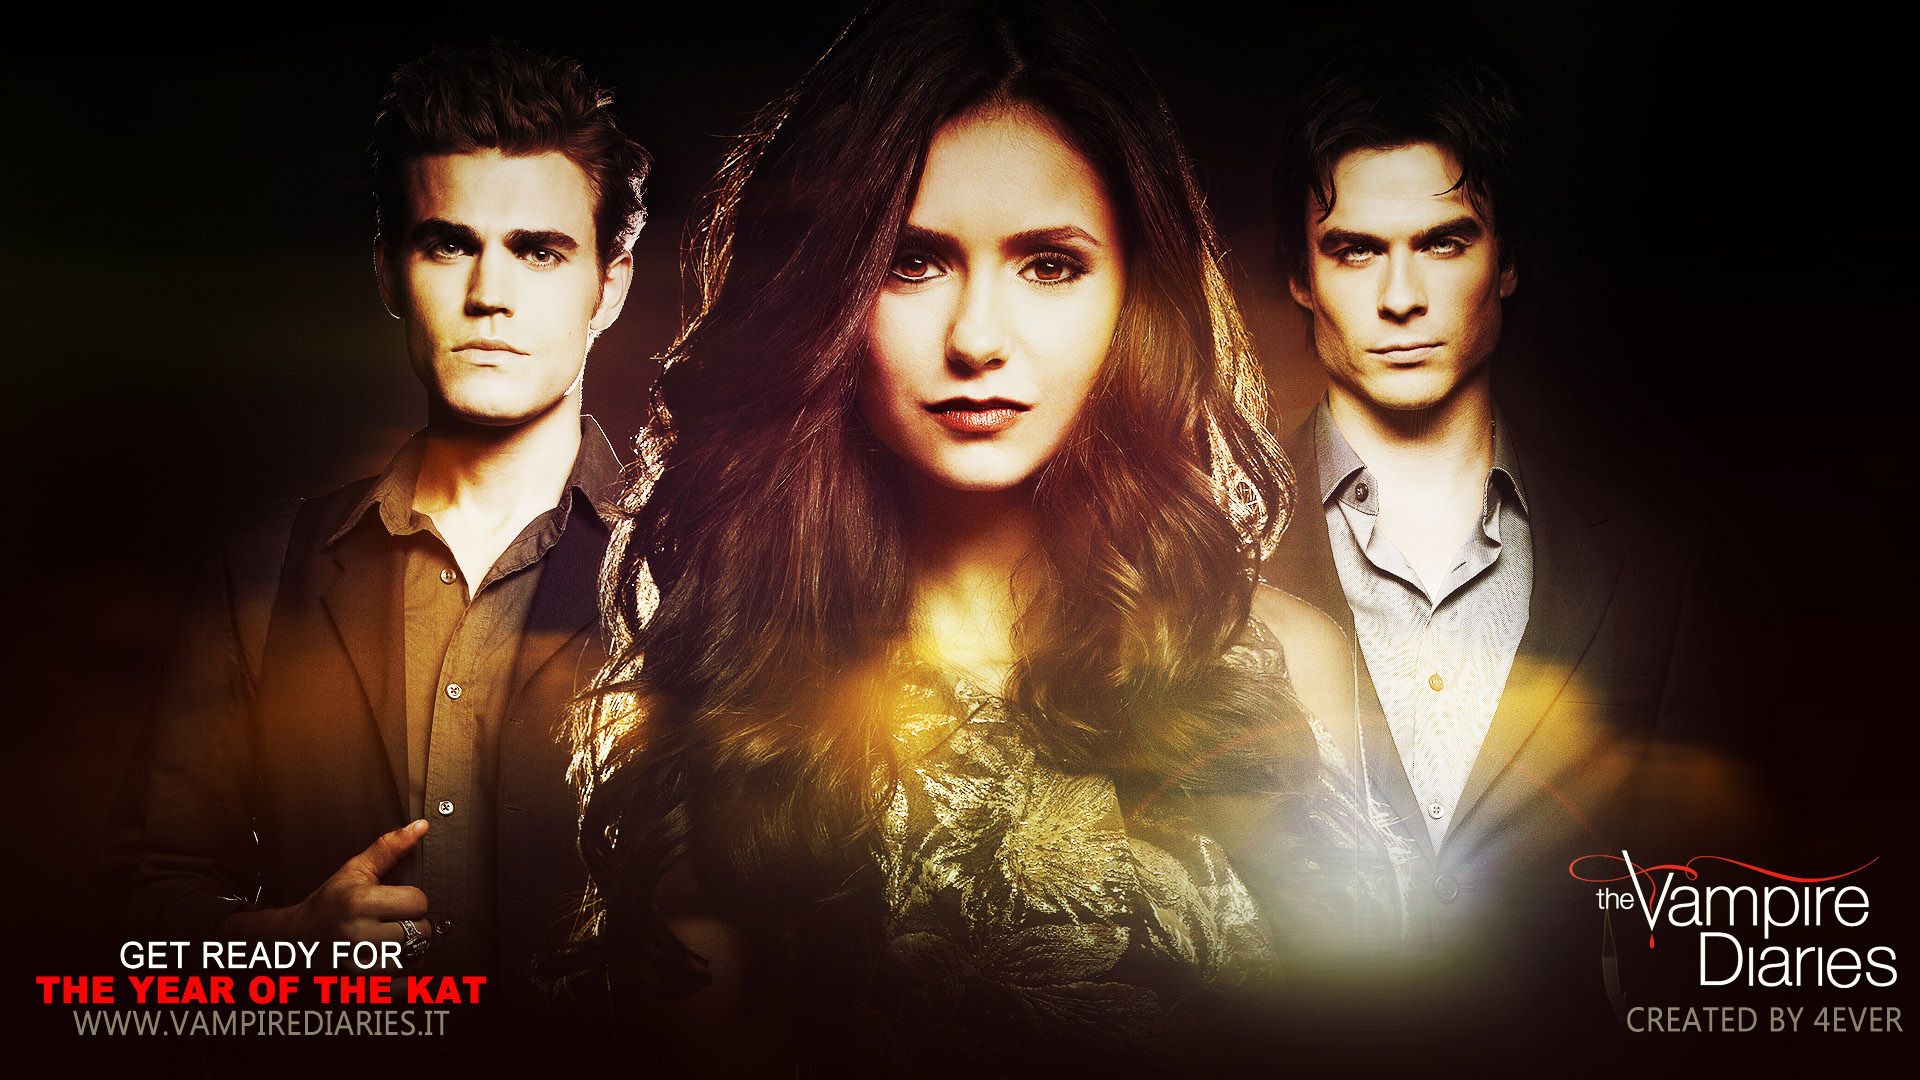 The Vampire Diaries TV Show images TVD wallpaper photos 15539381